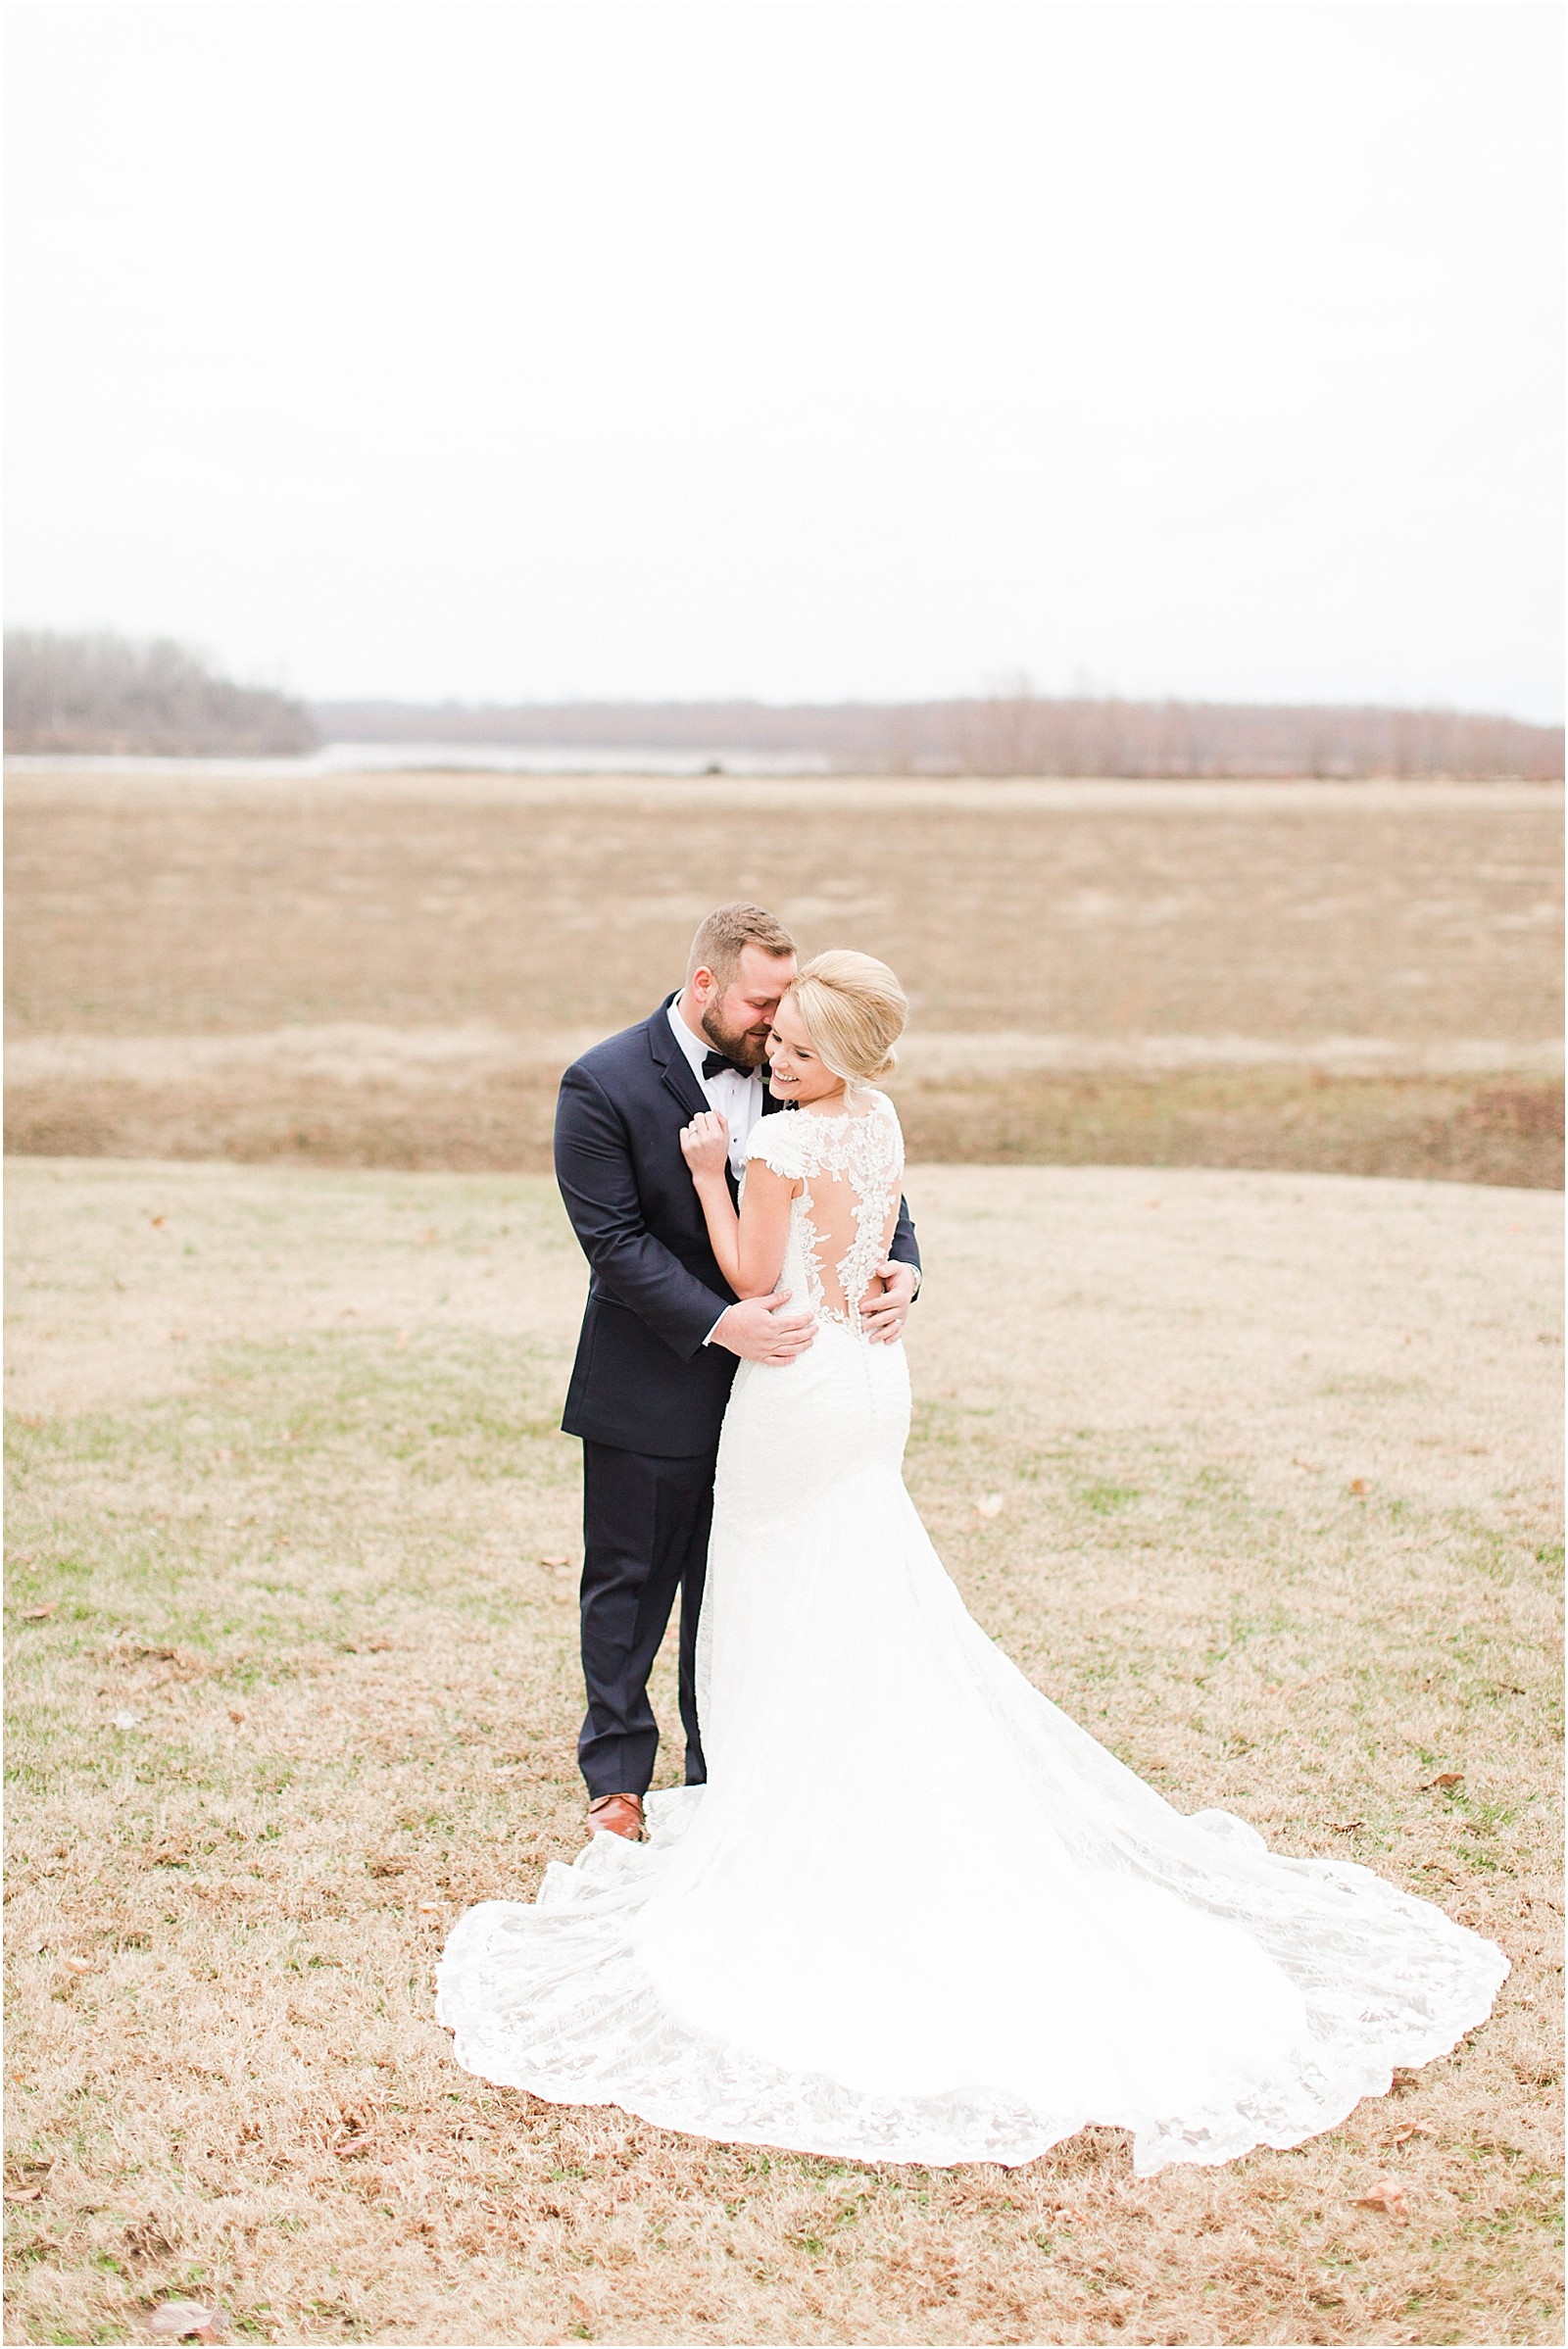 A Classic Winter Wedding in New Harmony | Rachel and Ryan | Bret and Brandie Photography 0099.jpg